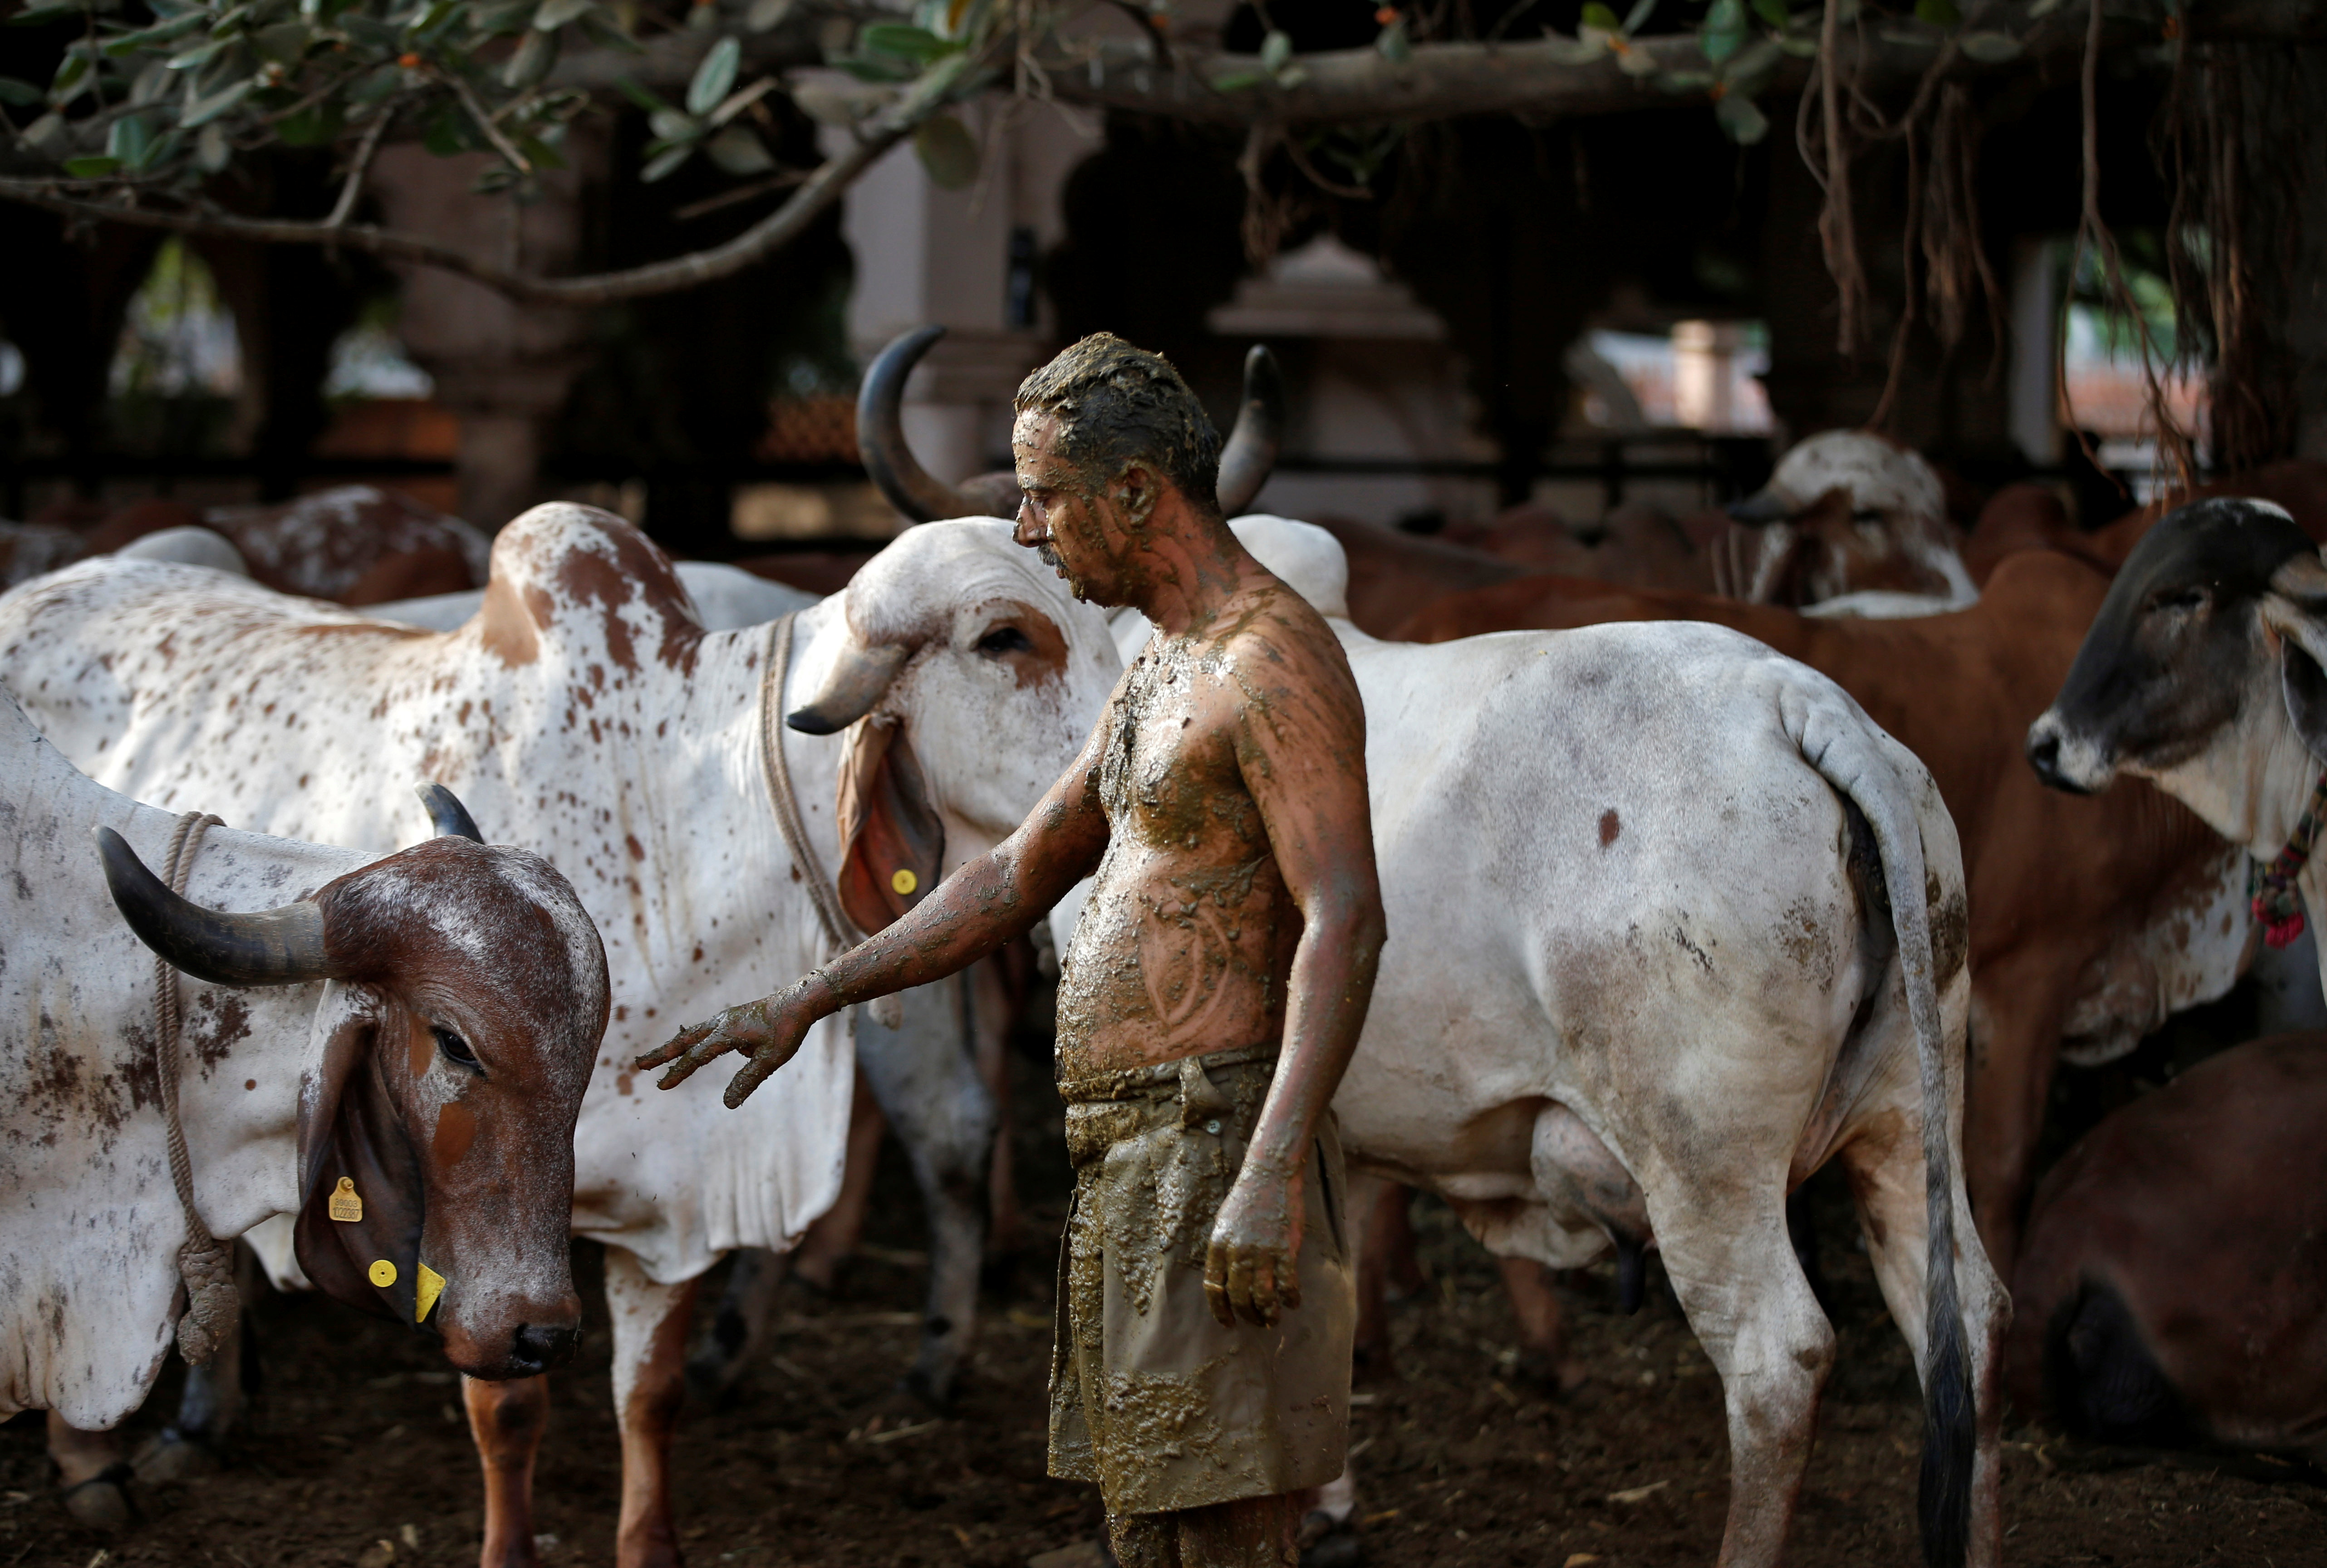 Uddhav Bhatia, a frontline worker, touches a cow after applying cow dung on his body during "cow dung therapy", believing it will boost his immunity to defend against the coronavirus disease (COVID-19) at the Shree Swaminarayan Gurukul Vishwavidya Pratishthanam Gaushala or cow shelter on the outskirts of Ahmedabad, India, May 9, 2021. REUTERS/Amit Dave